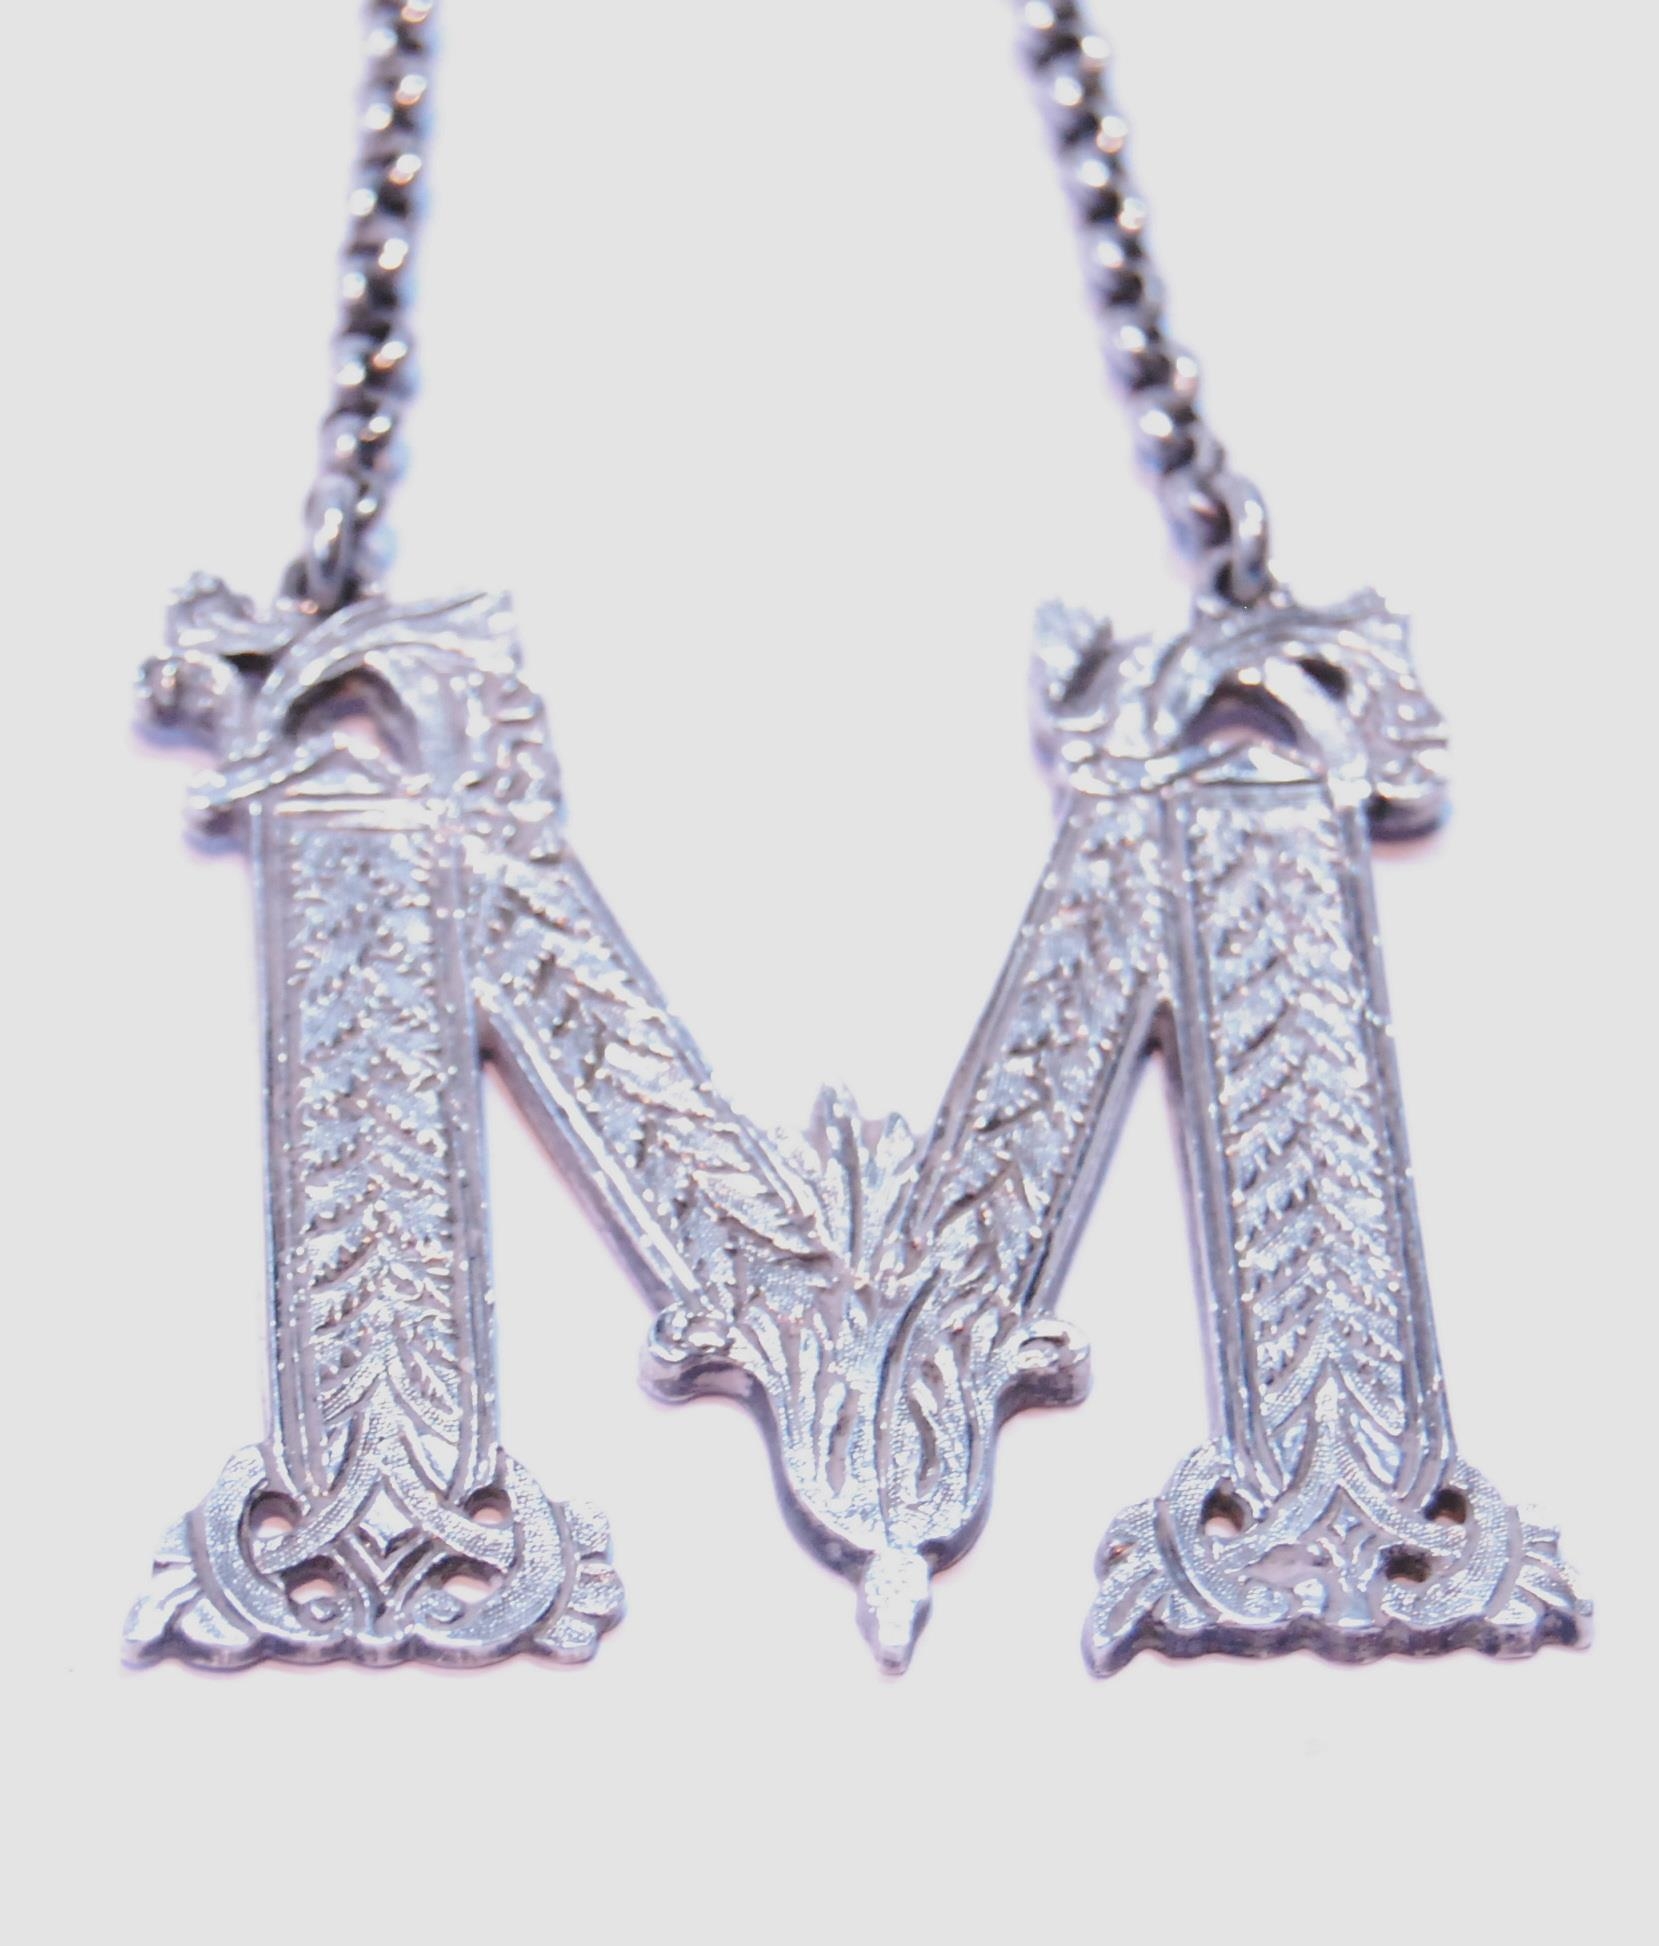 Pair of silver initial spirit labels, 'M' and 'P', elaborately chased and pierced, by Marshall & - Image 3 of 5